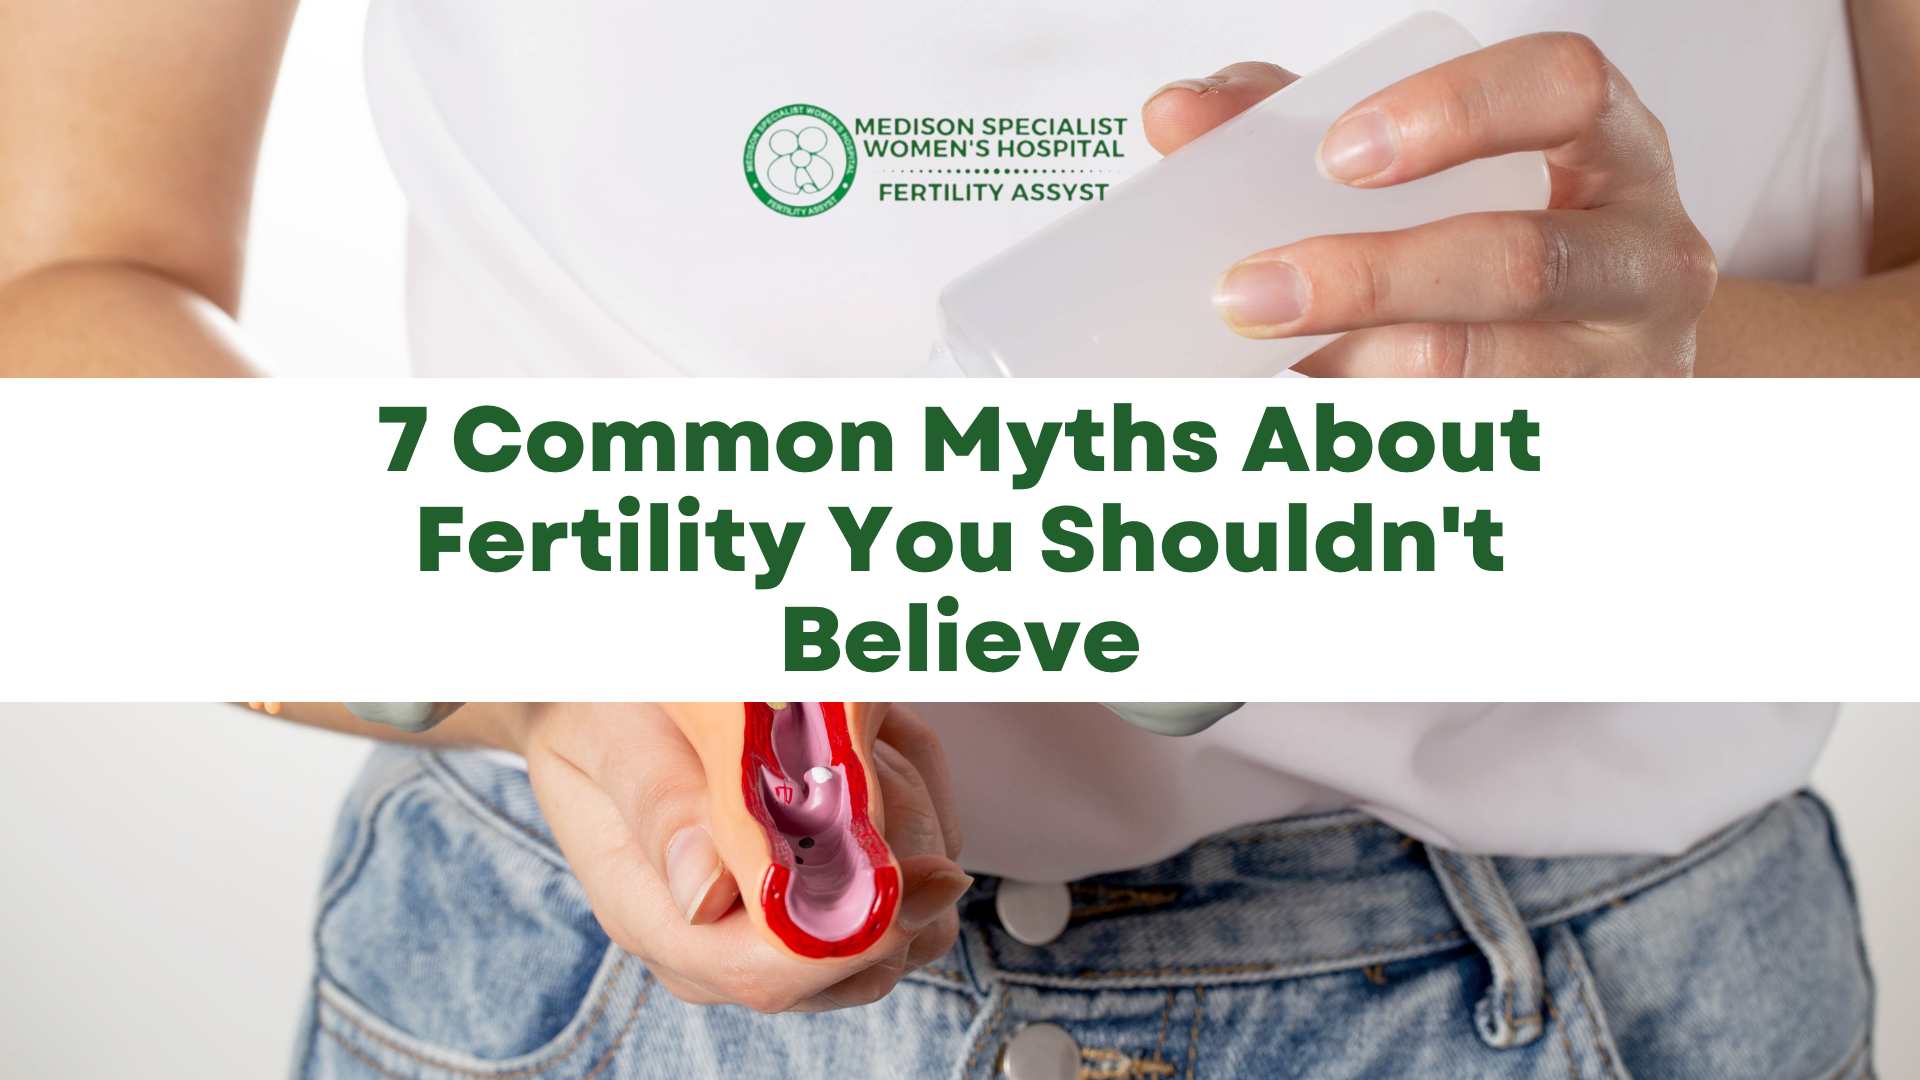 5 fertility and body myths every woman should shun, now!